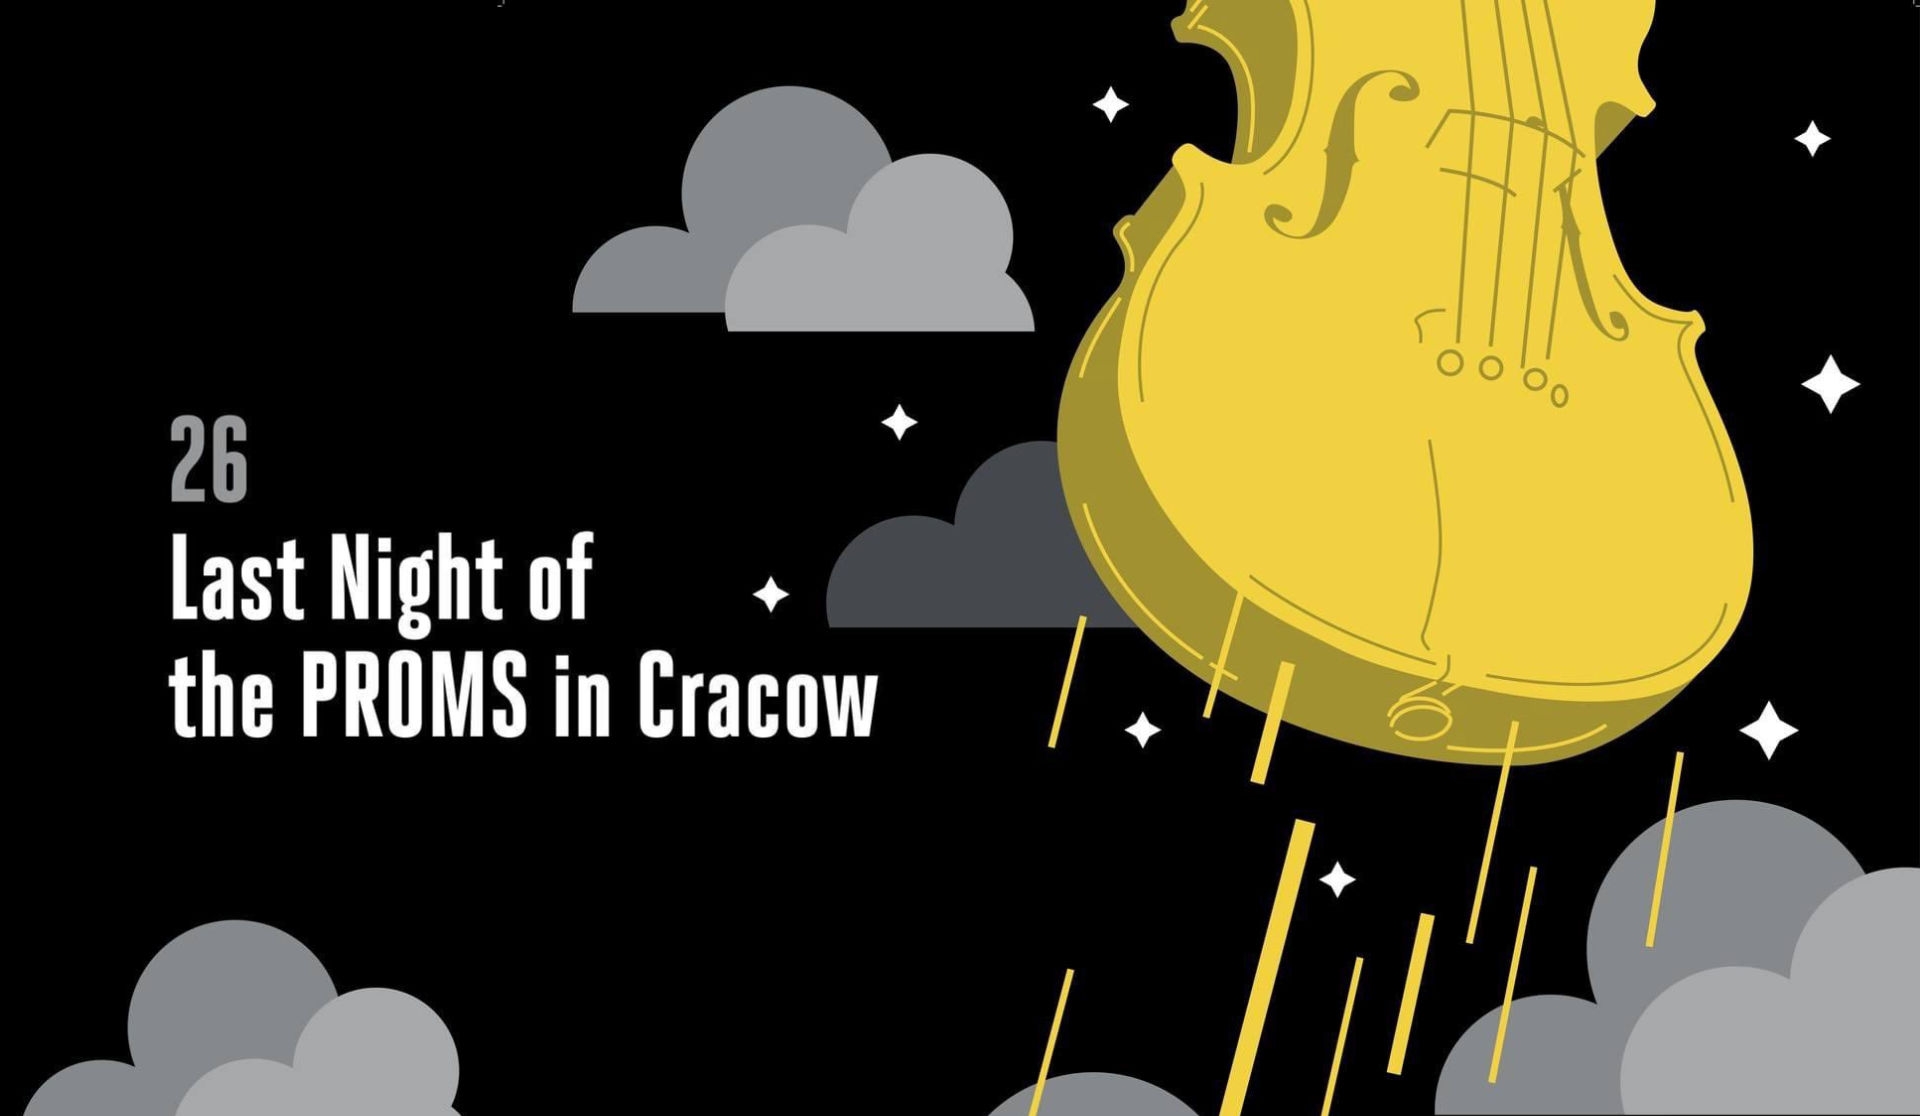 10.09.2022 – The Last Nights Of The Proms in Cracow